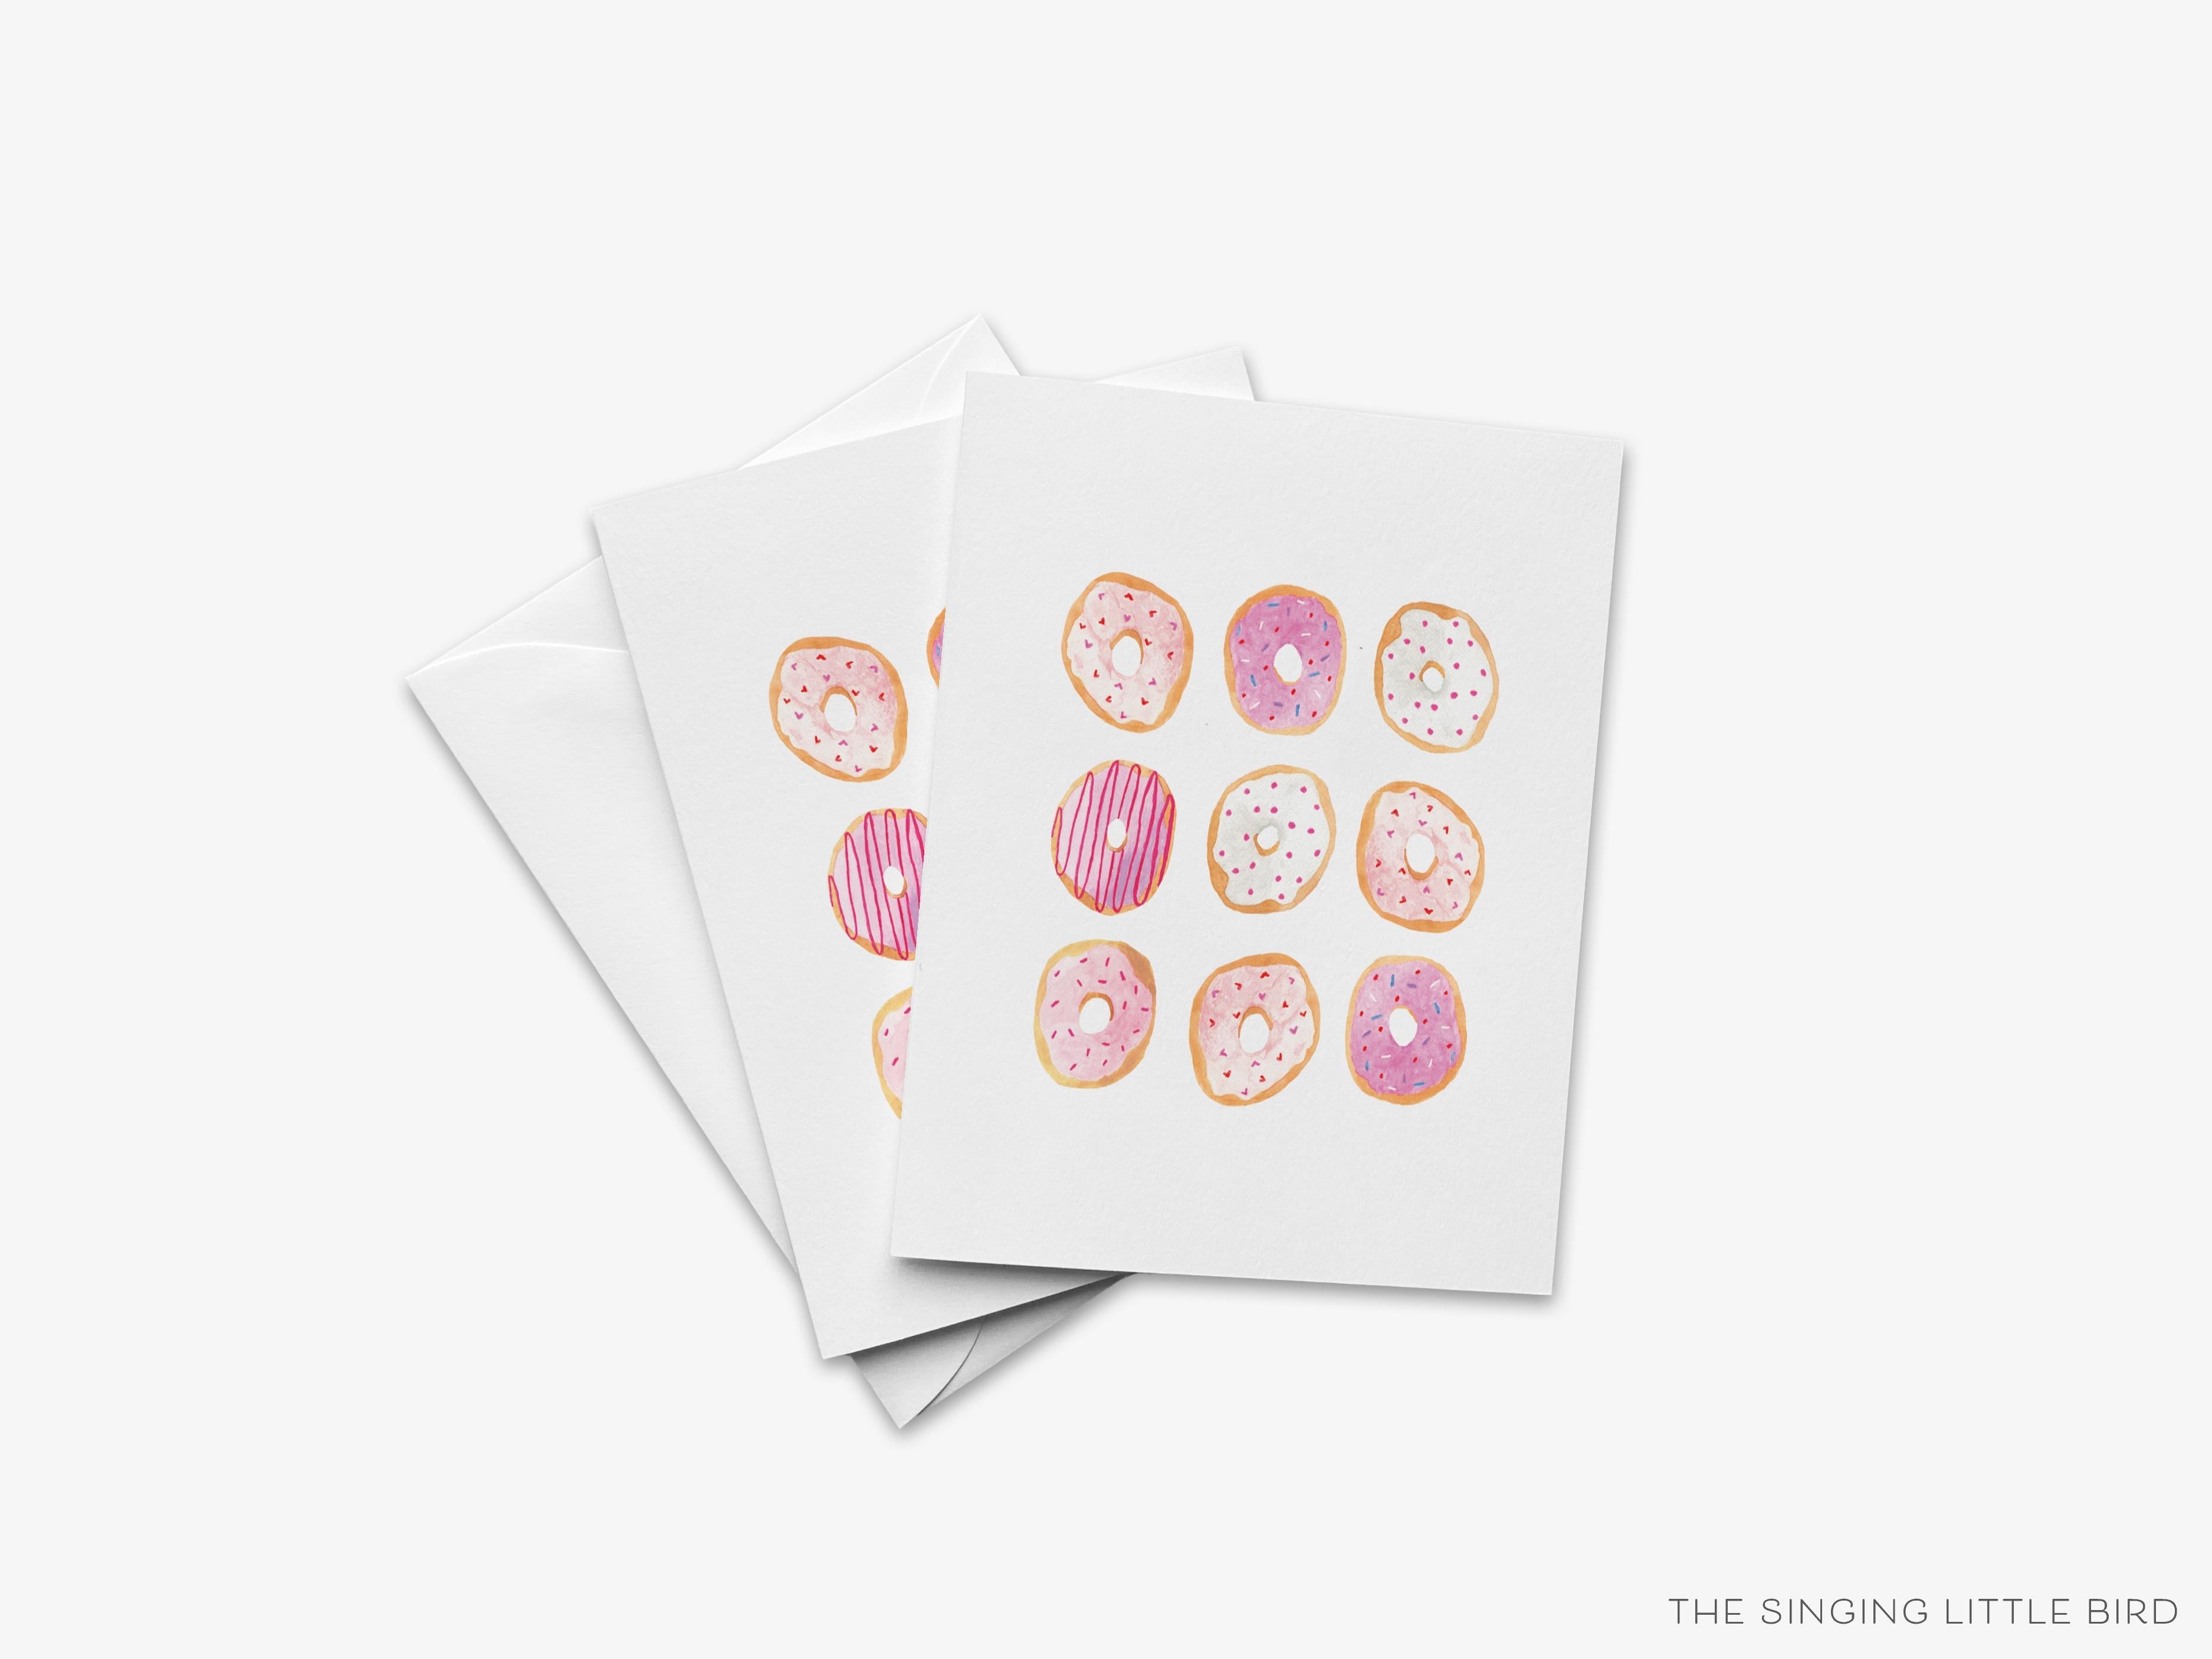 Donut Greeting Card-These folded greeting cards 4.25x5.5 and feature our hand-painted donut, printed in the USA on 100lb textured stock. They come with a White envelope and make a great thinking of you card for the sweet tooth lover in your life.-The Singing Little Bird